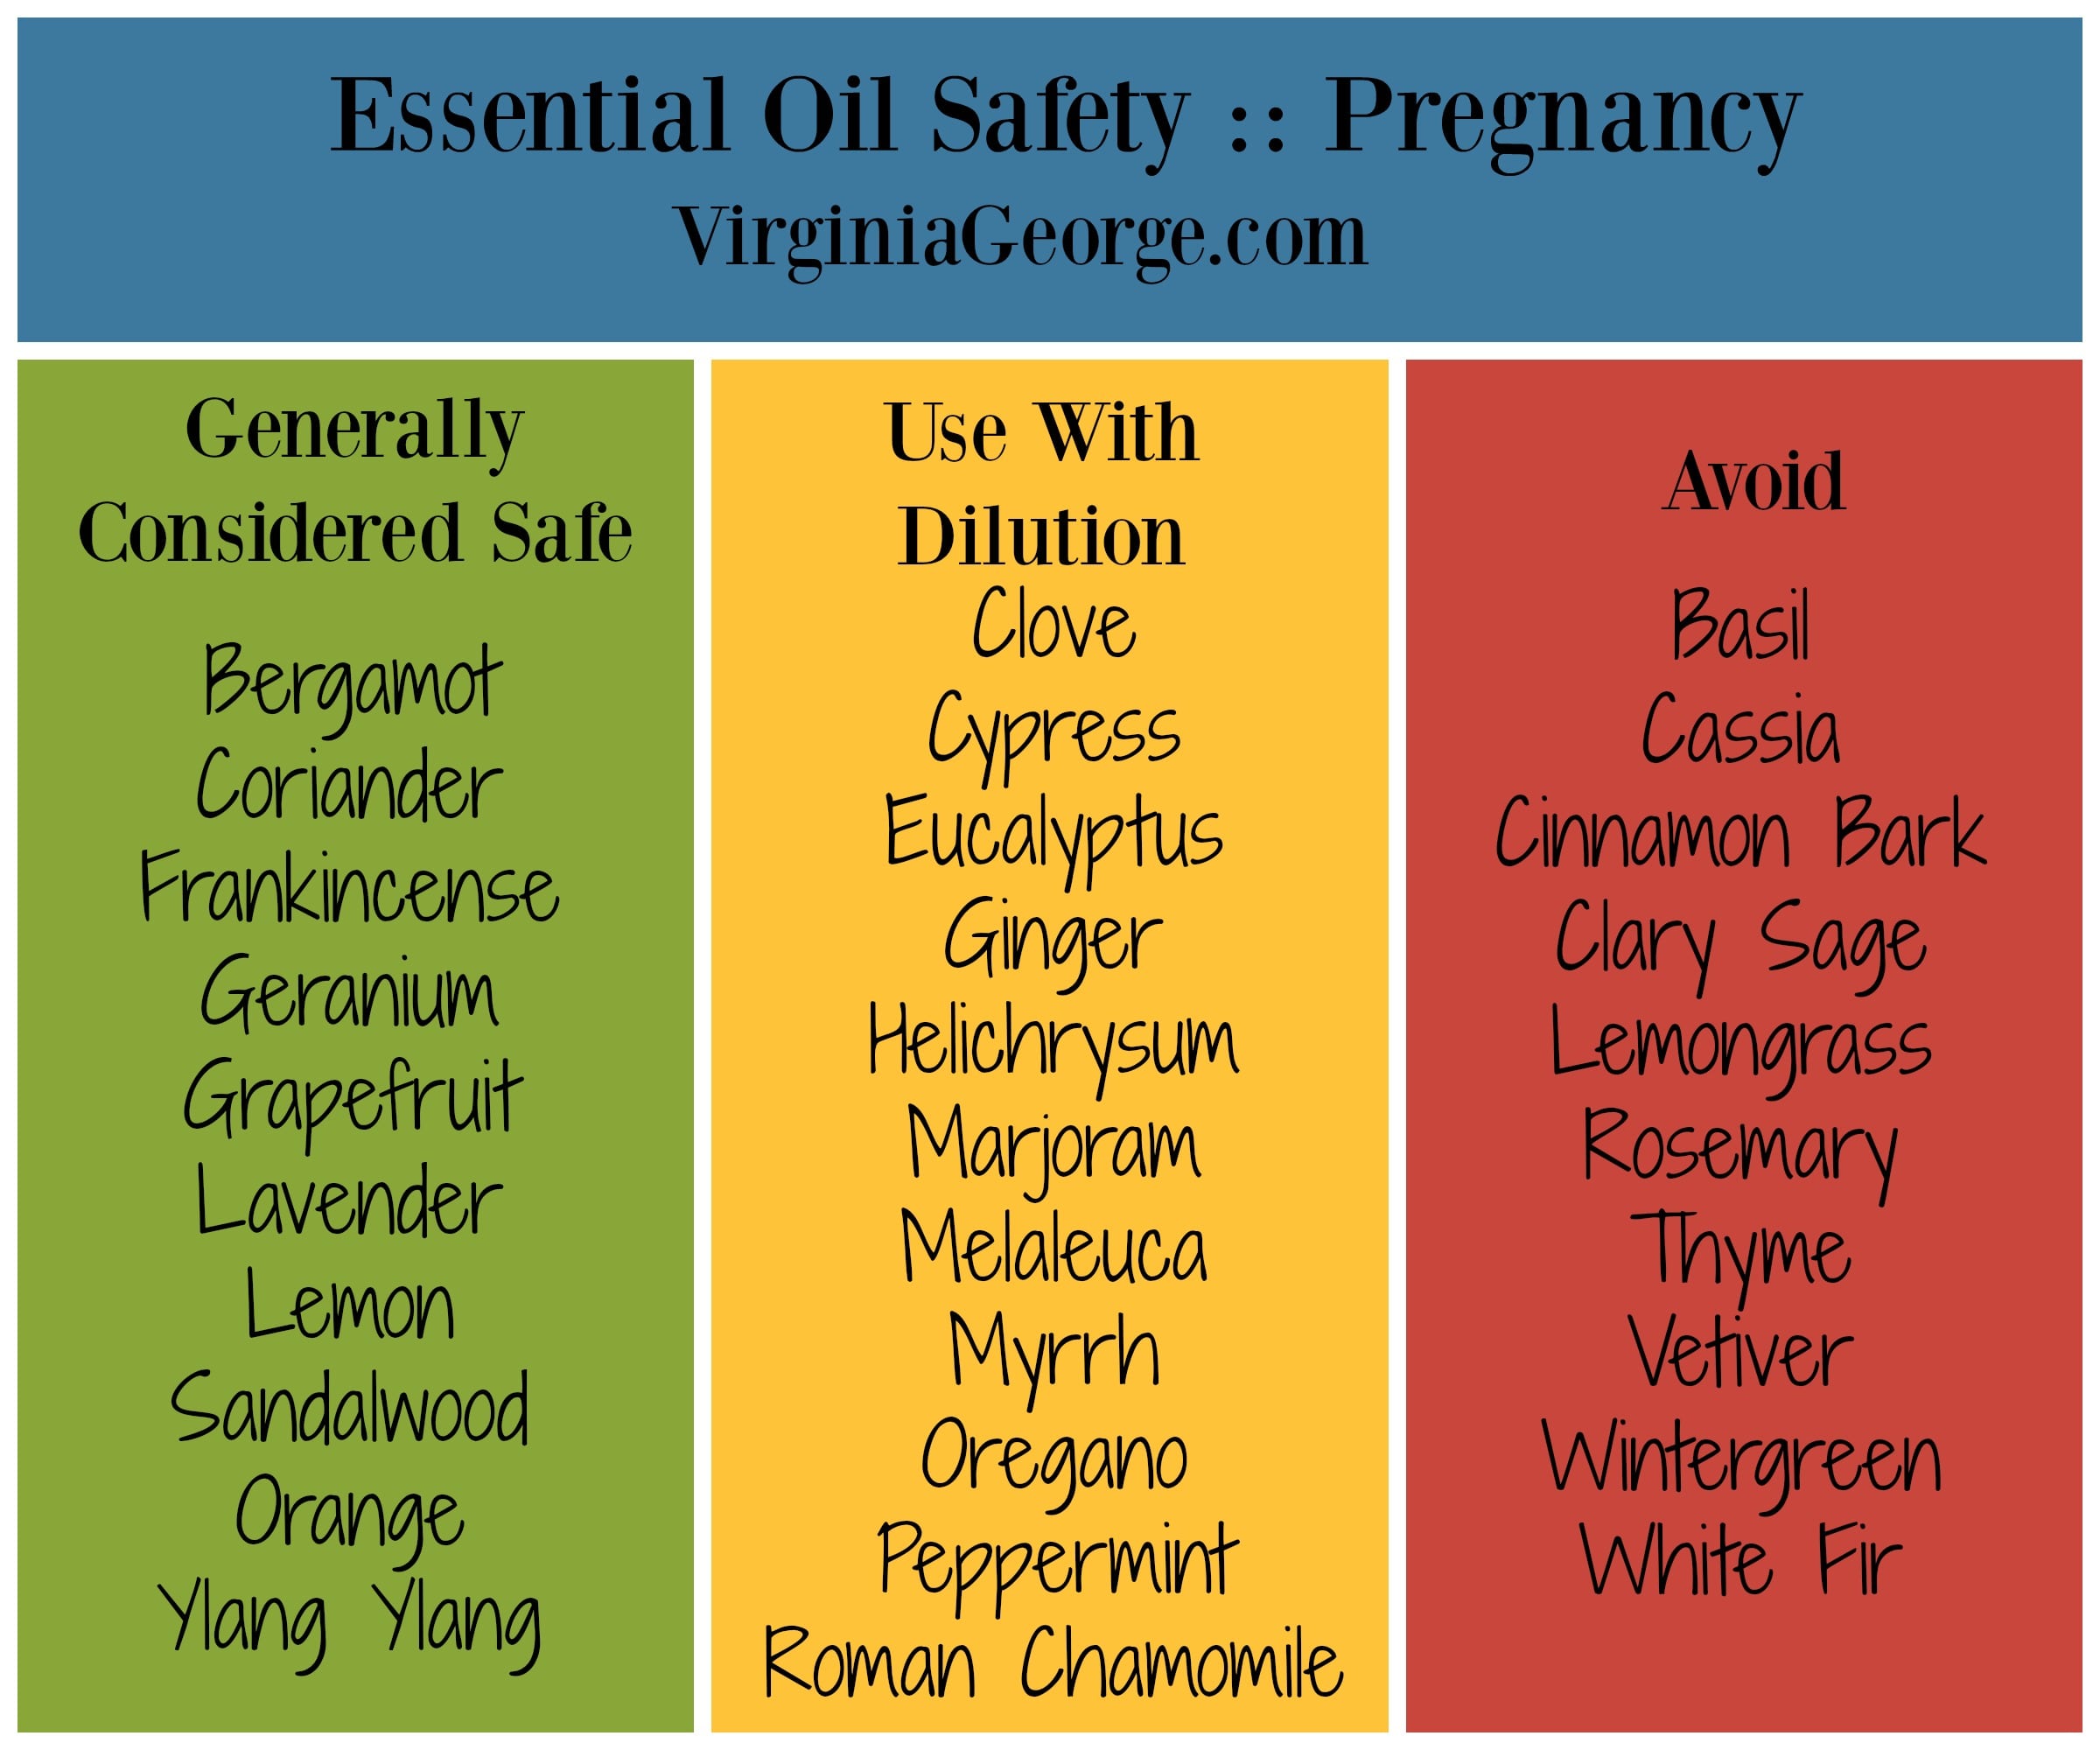 Are Essential Oils Safe During Pregnancy?